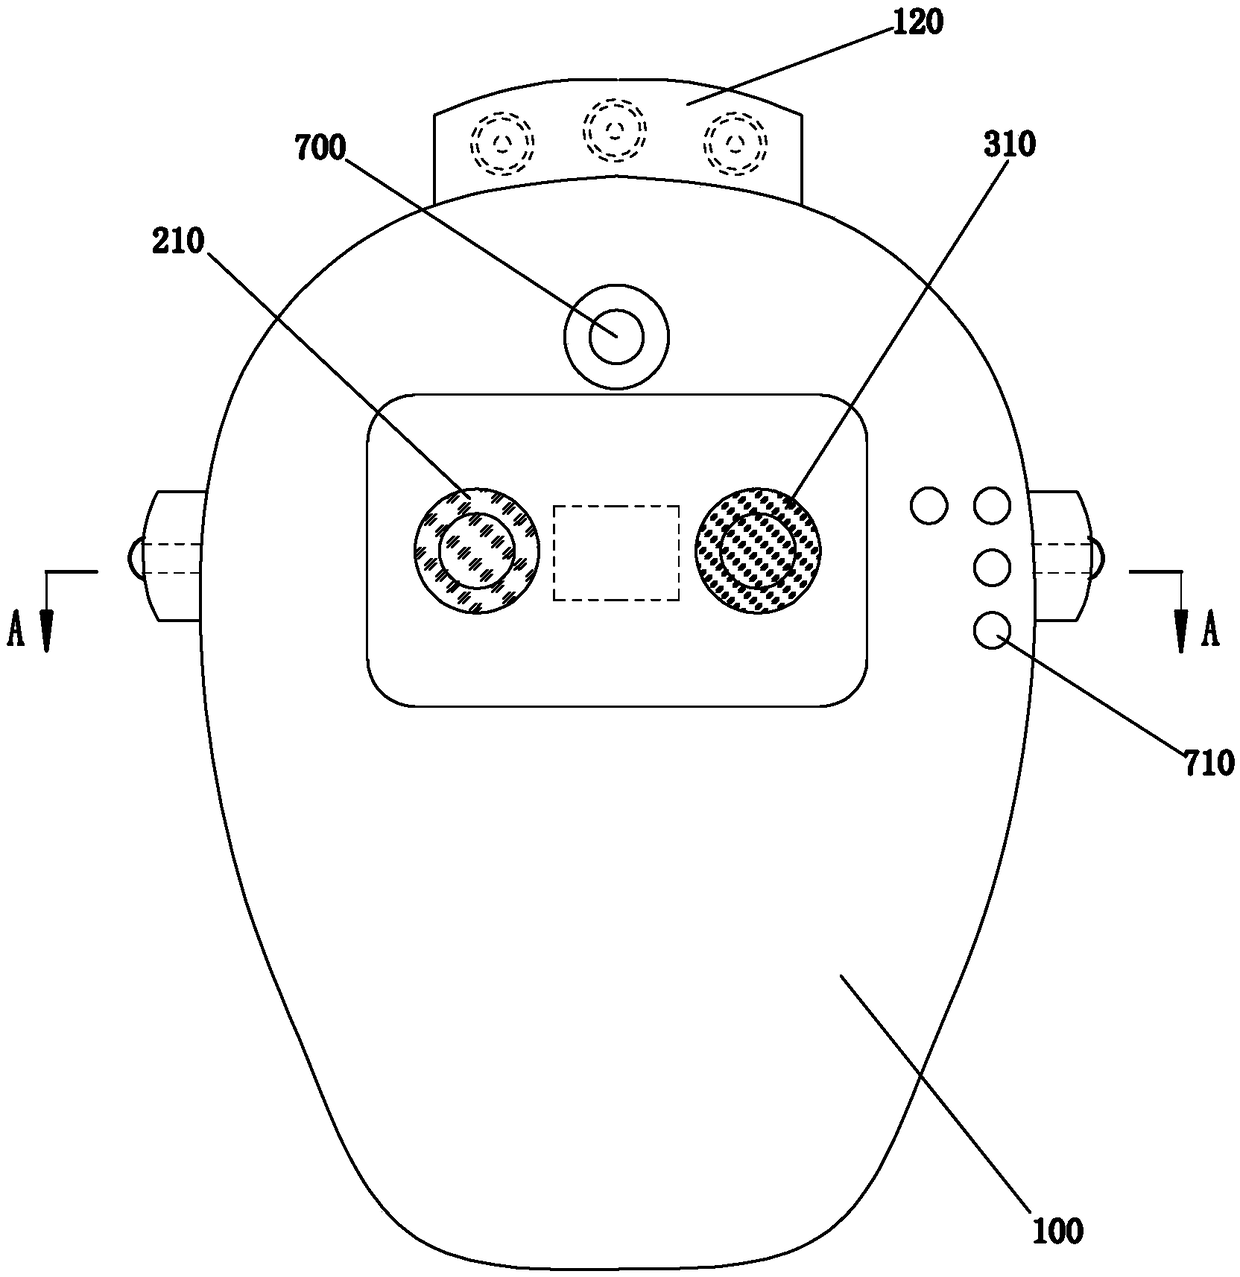 Helmet shield with dual cameras and liquid crystal display screen